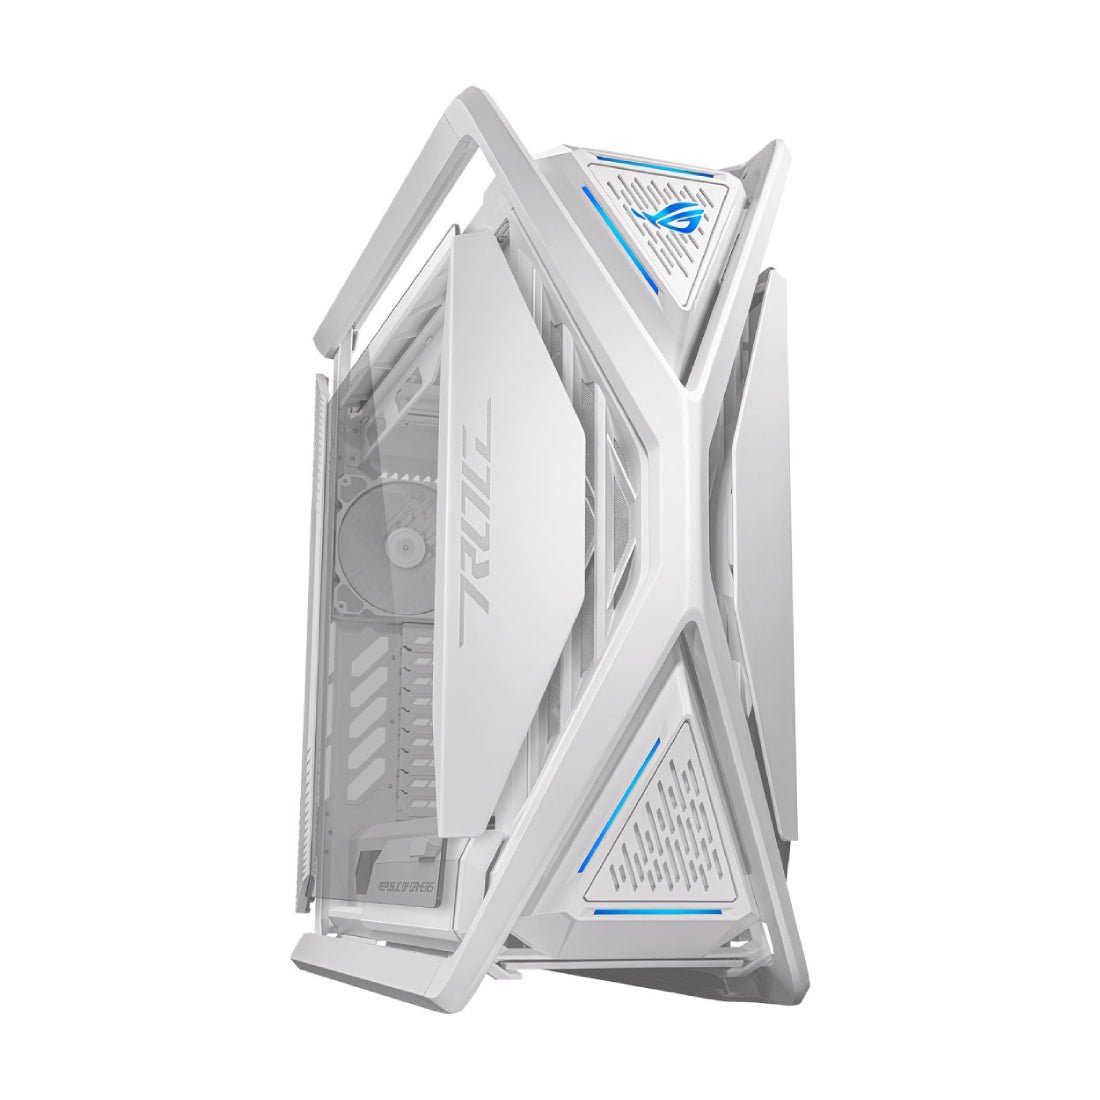 Asus ROG Hyperion GR701 E-ATX Tower Chassis - White Edition - صندوق - Store 974 | ستور ٩٧٤